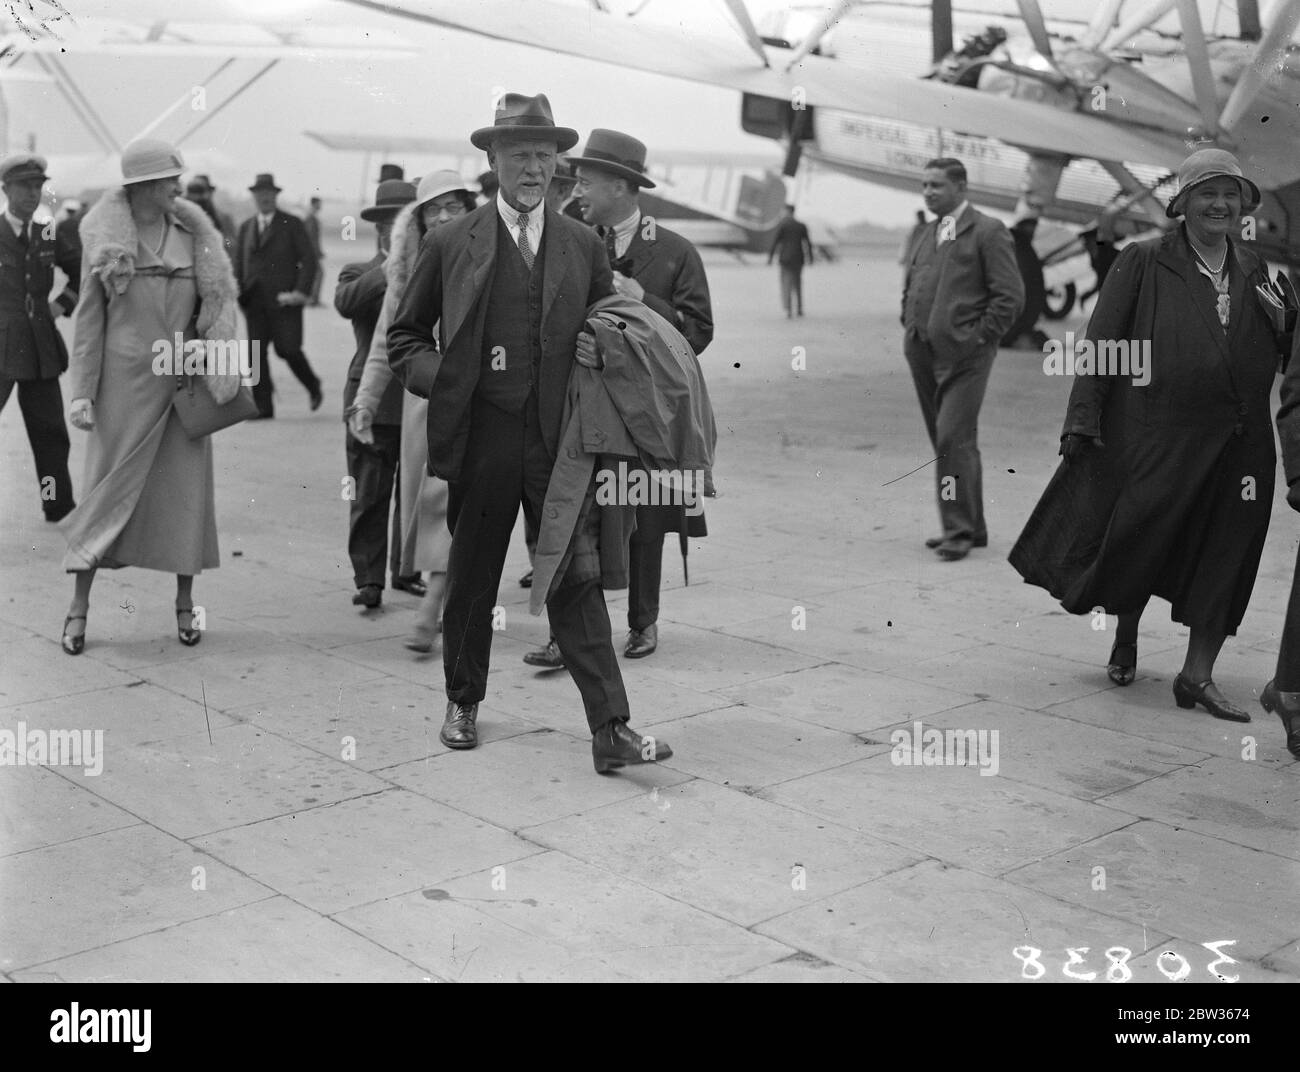 General Smuts arrives by air for World Economic Conference . General Smuts , the leader of the South African delegation to the World Economic Conference , arrived at Croydon Aerodrome having flown the entire jouney from Cape Town . General Smuts smiling happily as he was greeted on arrival at Croydon Aerodrome . 11 June 1933 Stock Photo